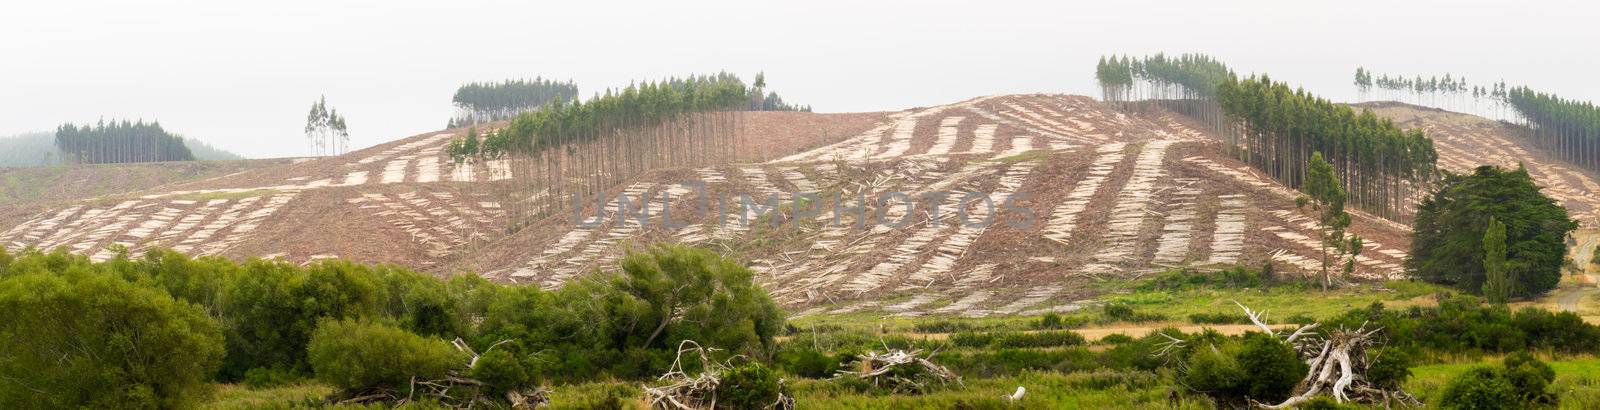 Vast clearcut Eucalyptus forest for timber harvest by PiLens